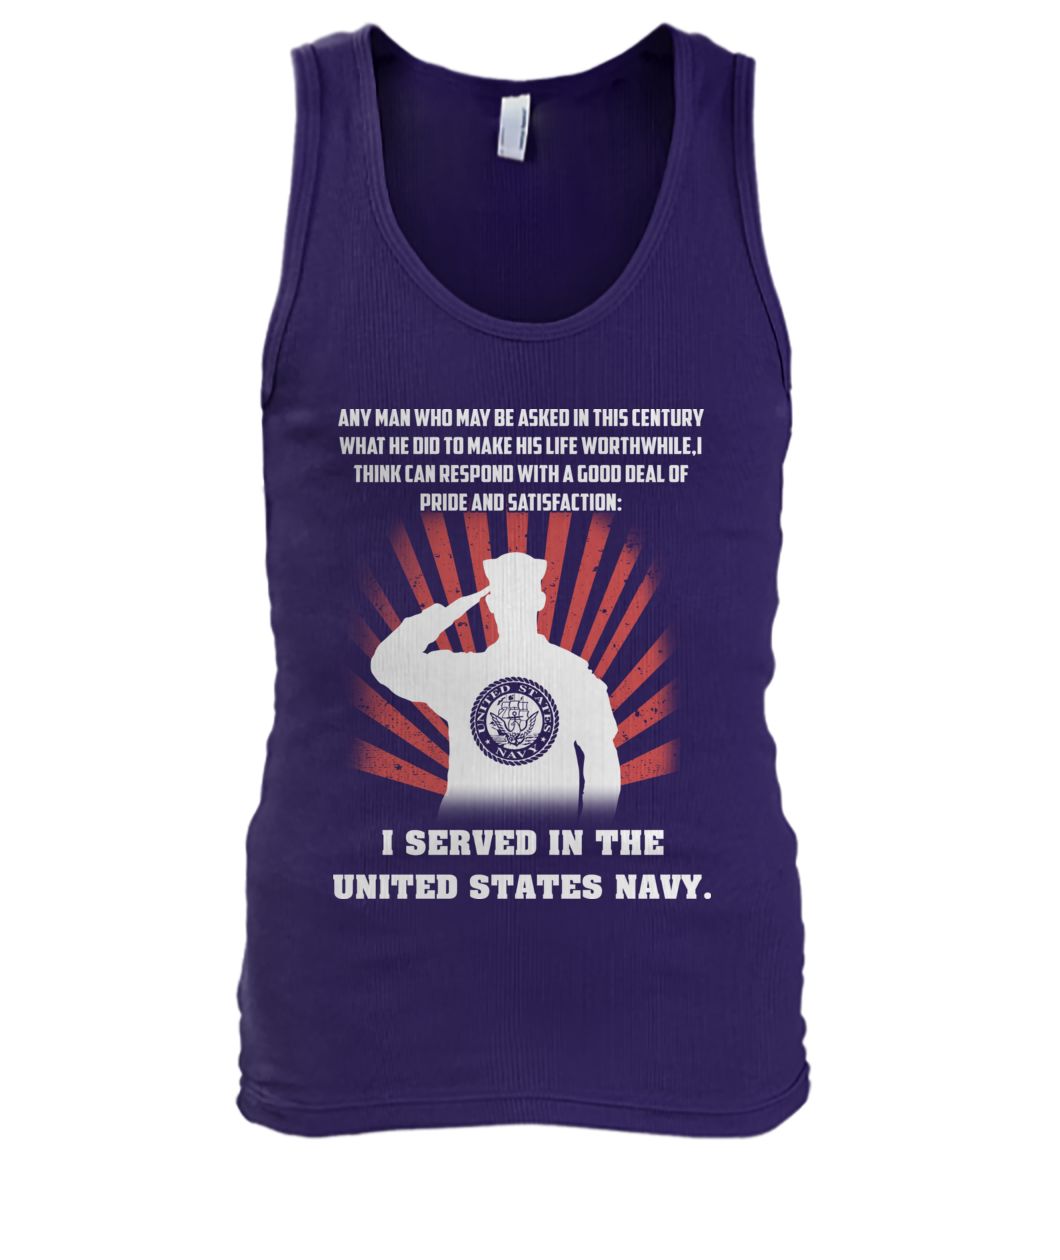 US sailor army any man who may be asked in this century what he did to make his life worthwhile men's tank top